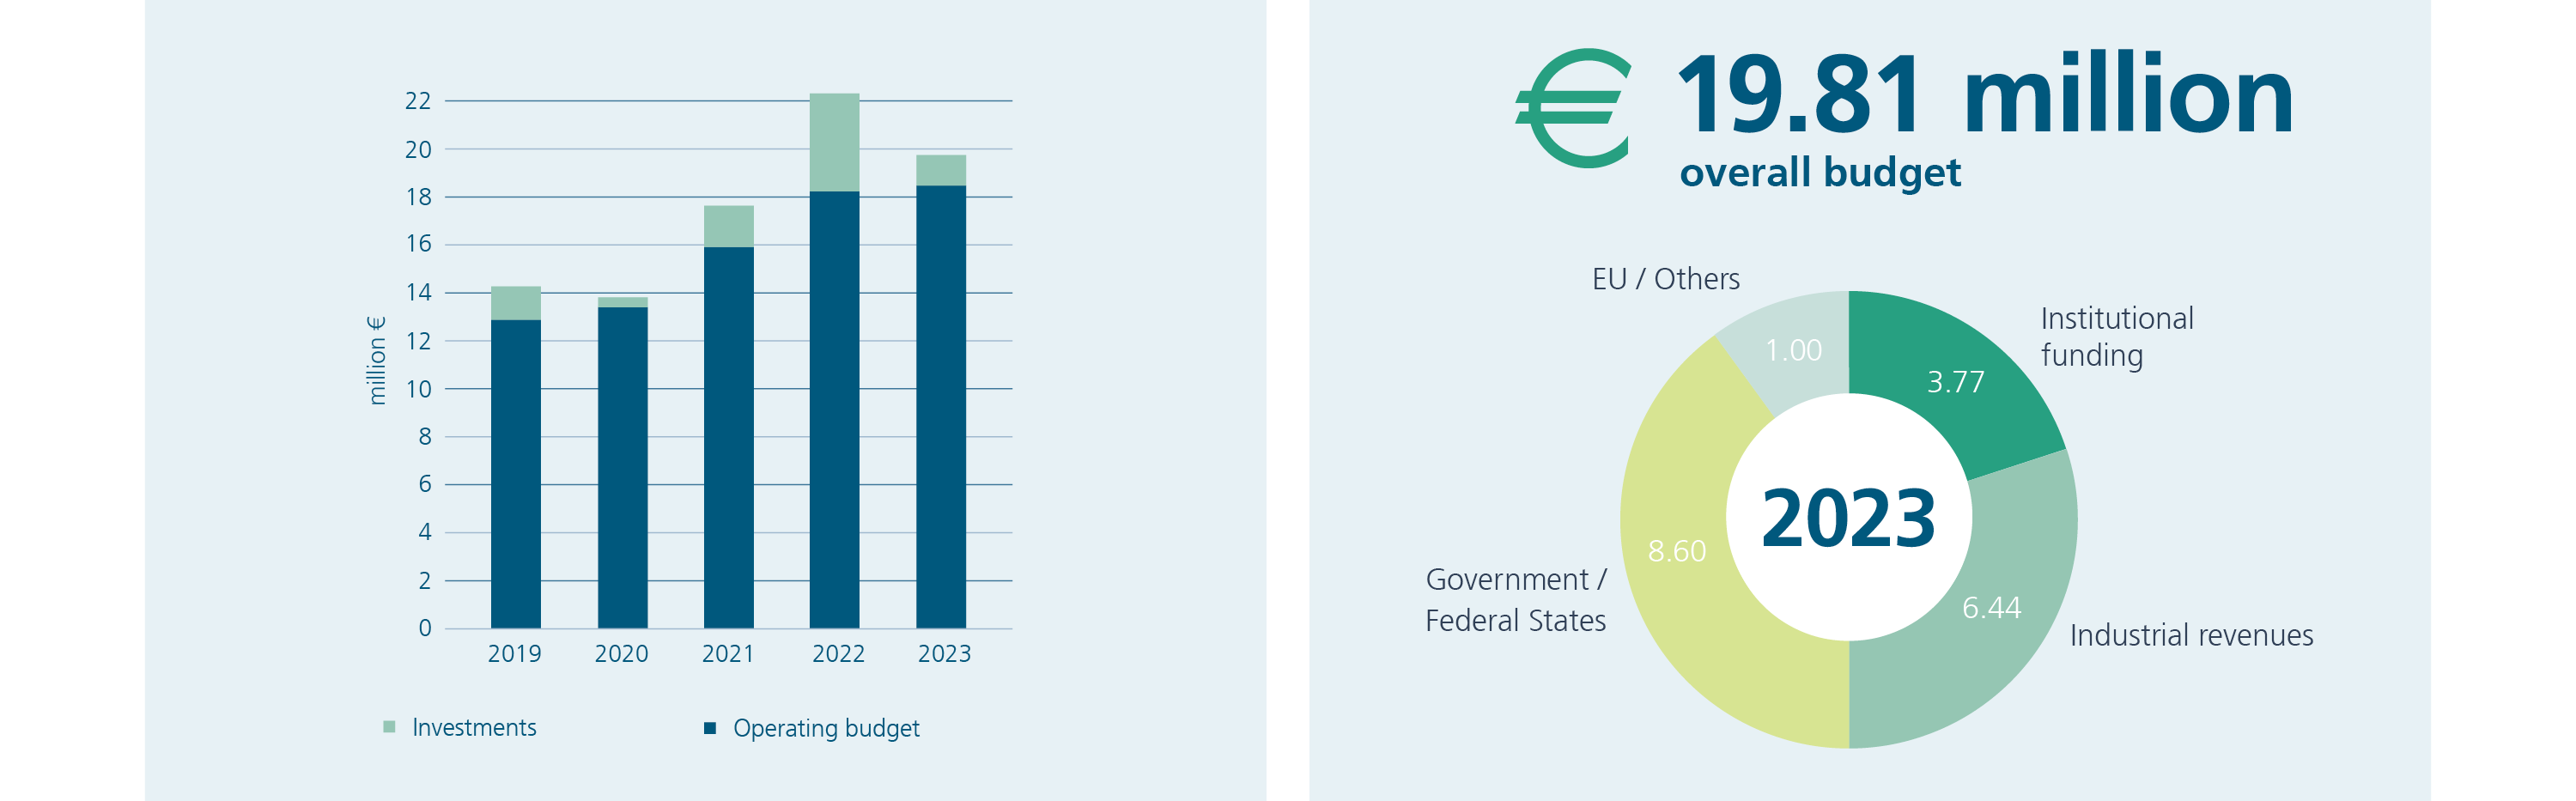 Development overall budget of the Fraunhofer IST 2019-2023 and revenues 2023